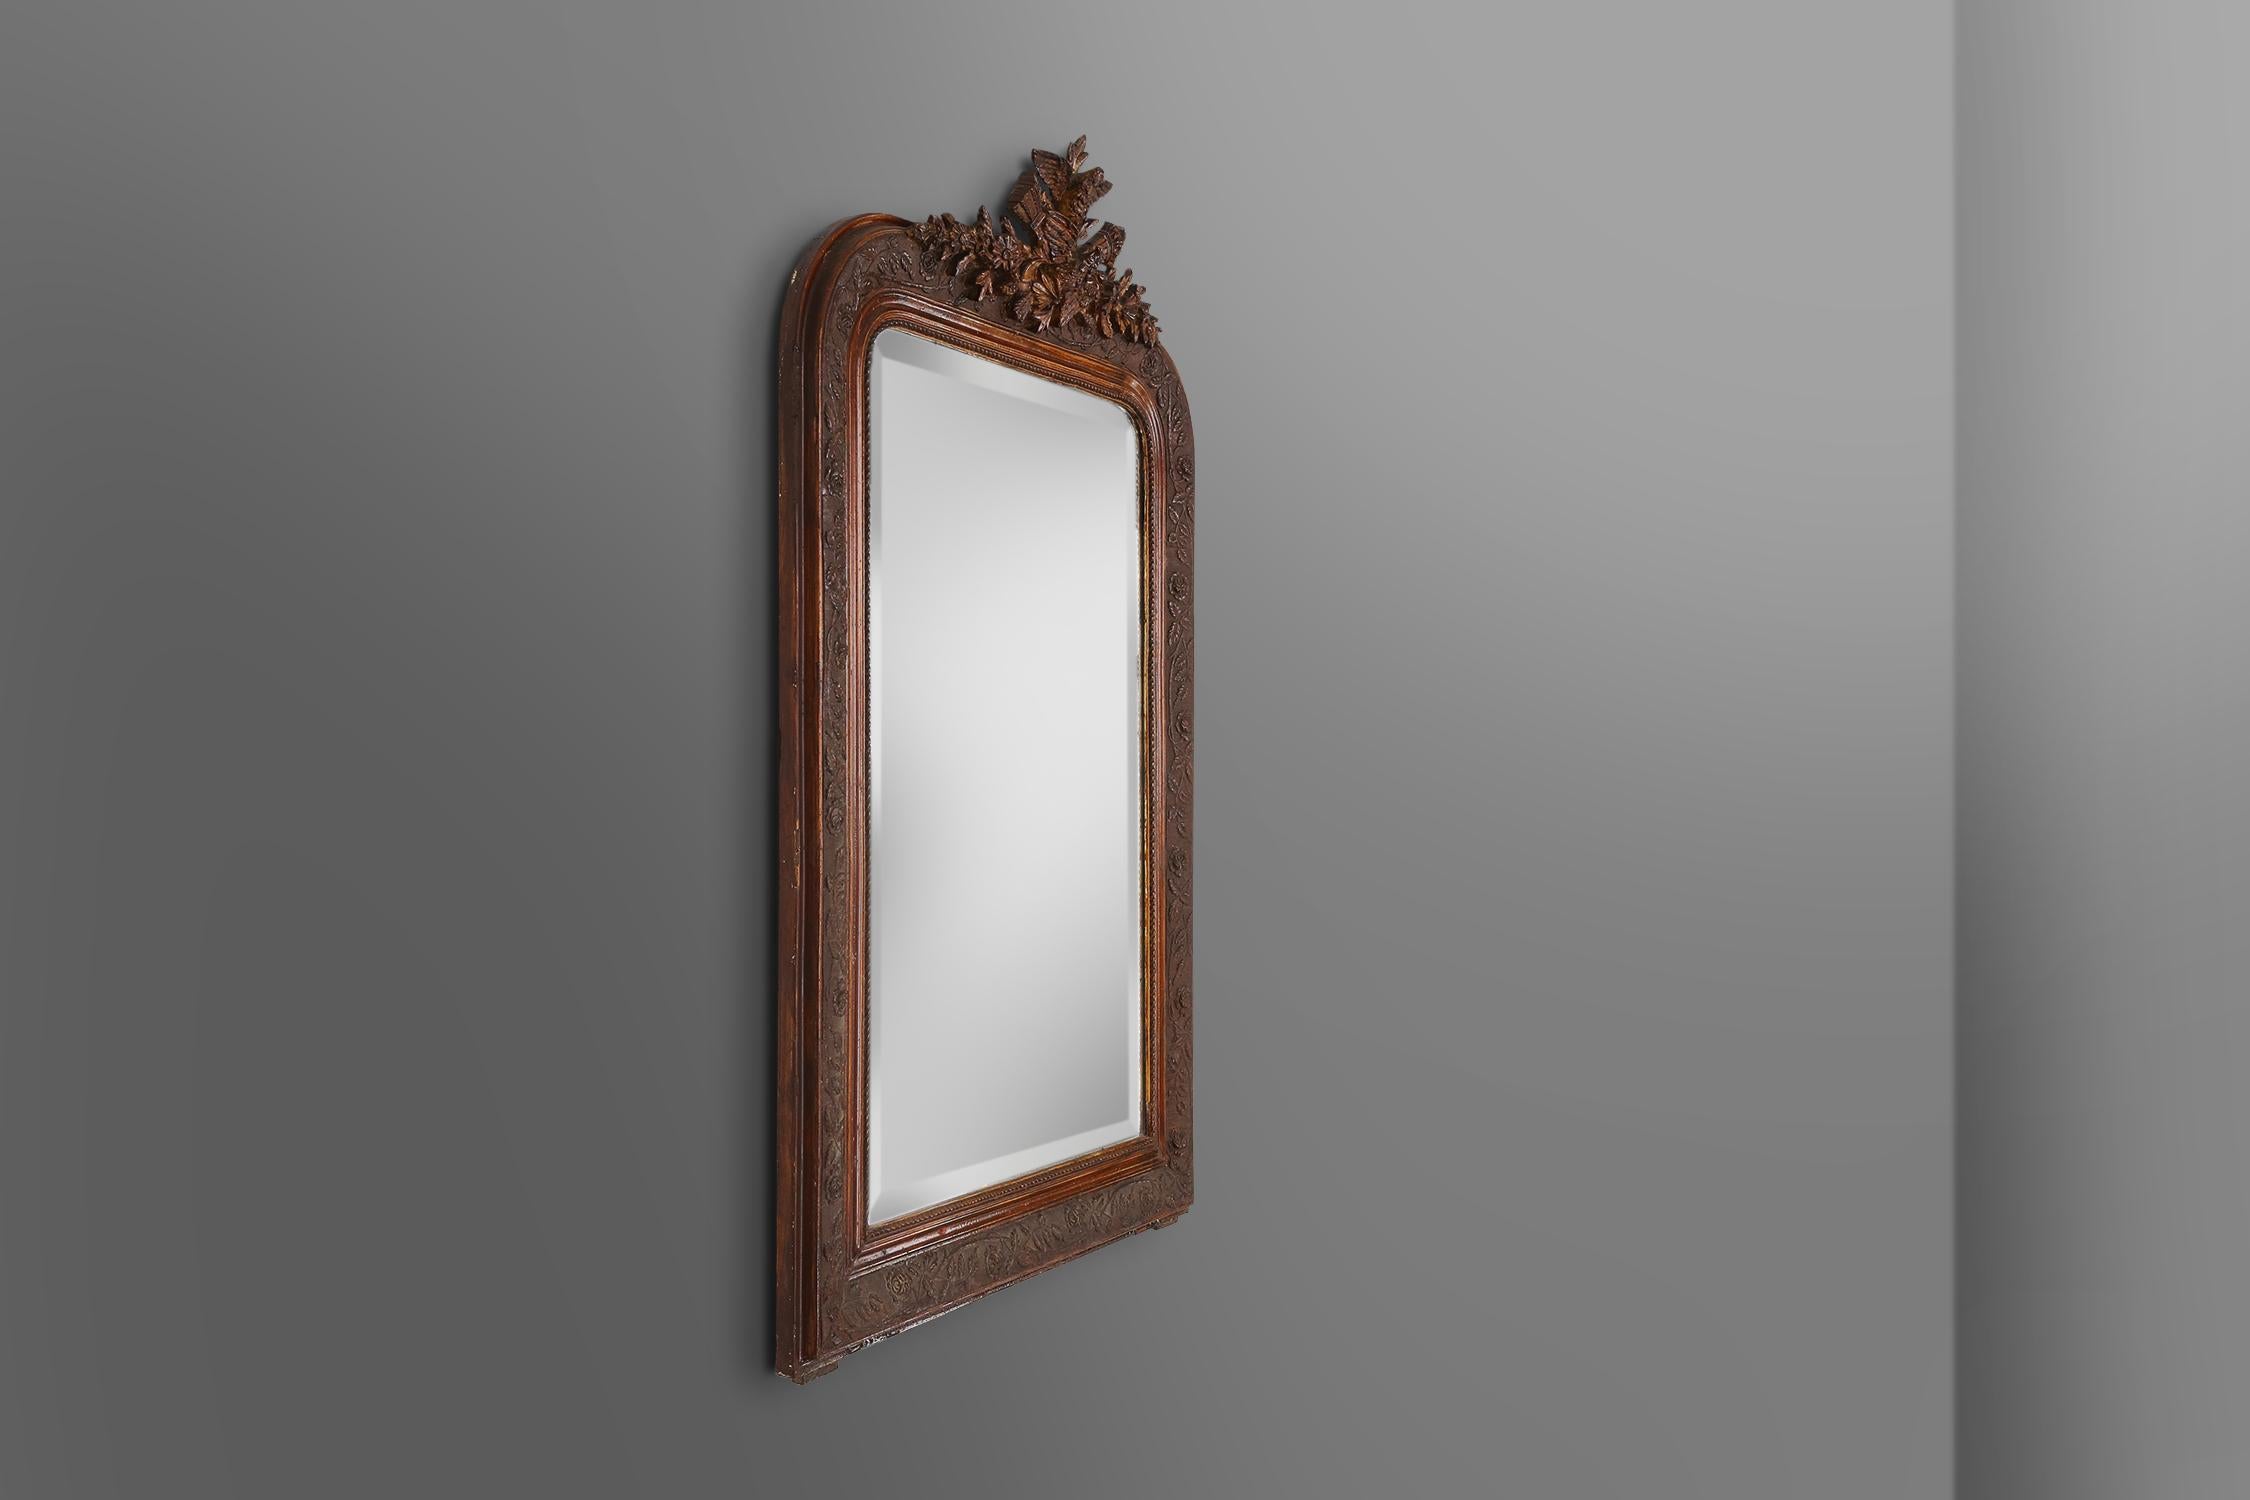 France / 1900 / mirror / wood and plaster / Louis Philippe / antiques

A beautiful French mirror in Louis Philippe style, made in France ca. 1900. The mirror made of plaster and wood has a very detailed frame with hand crafted roses. The spectacular